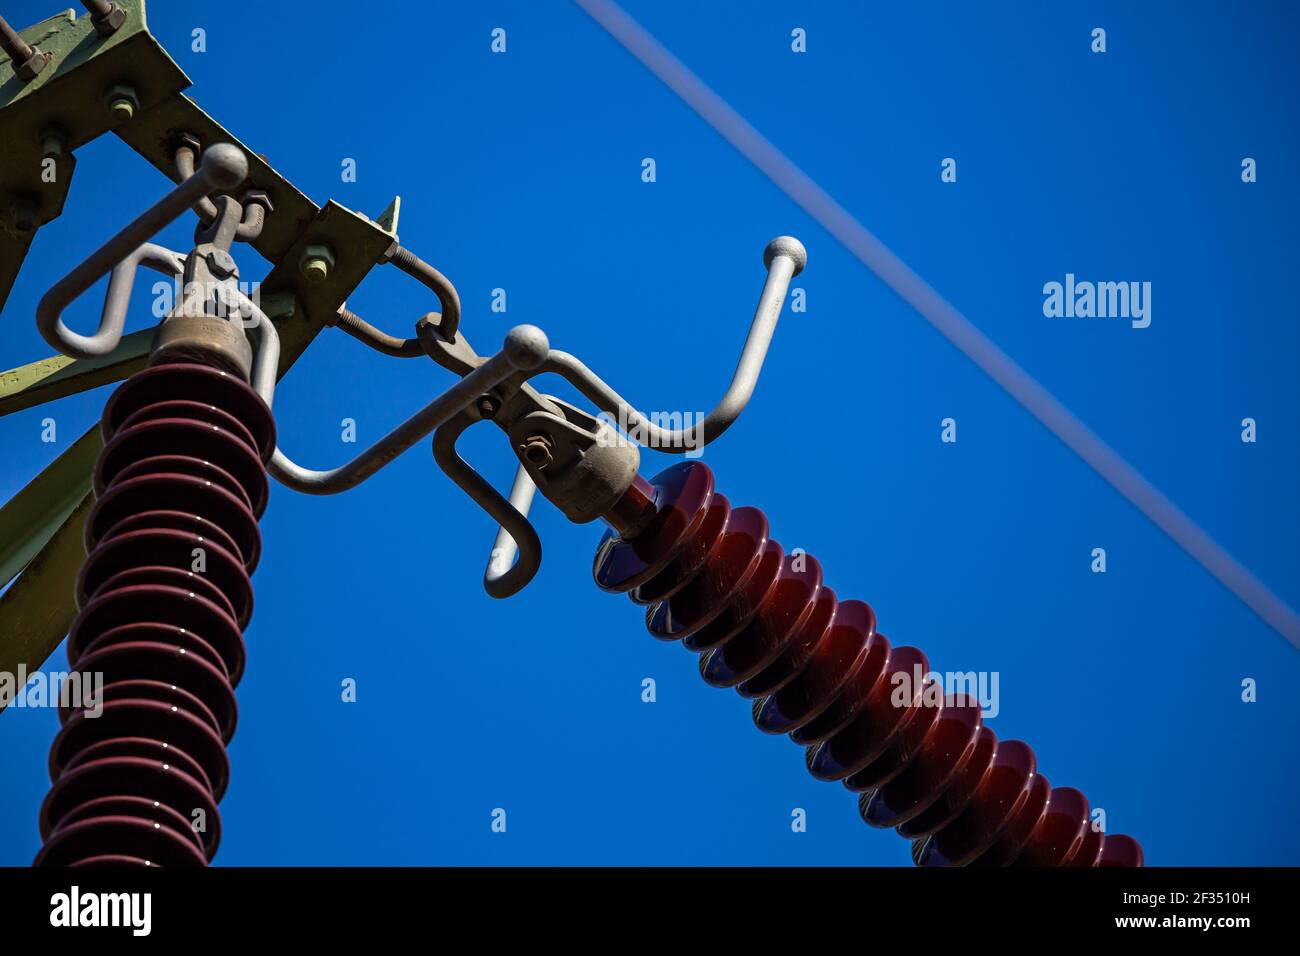 Close-up of insulators on high voltage pylons against the background of blue sky. Made in a sunny day, deep blue skies Stock Photo